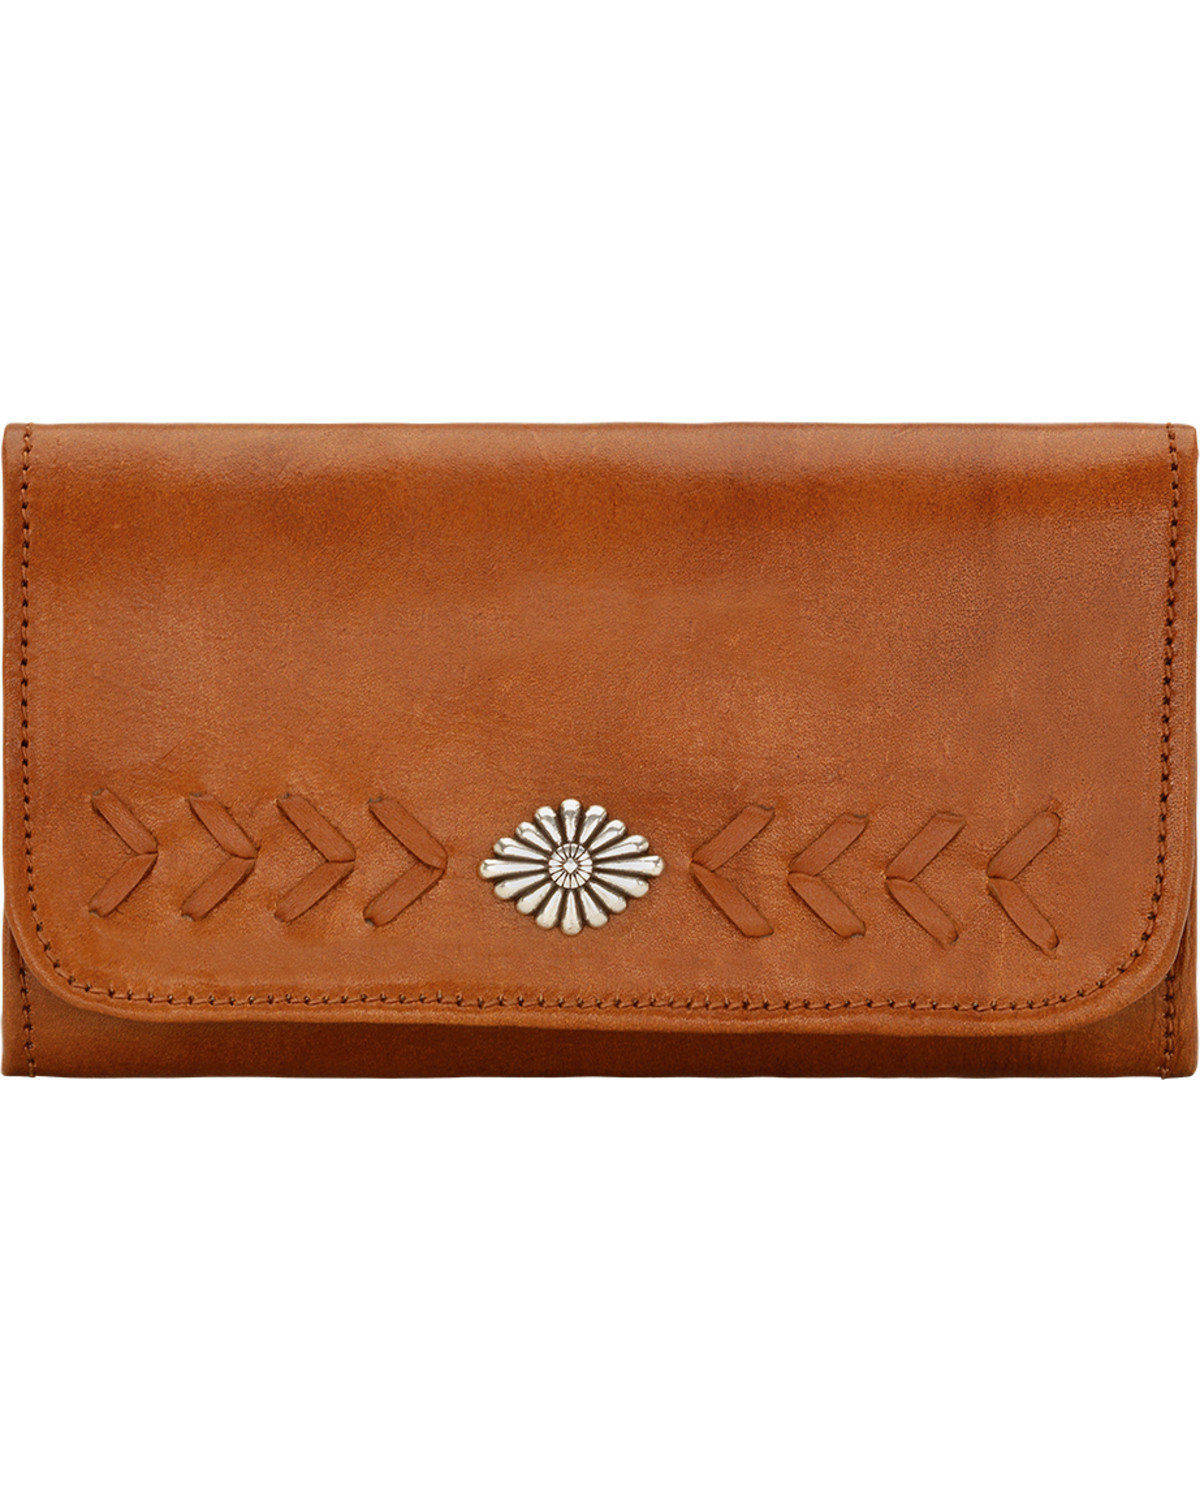 American West Women's Mohave Canyon Ladies' Golden Tan Tri-Fold Wallet